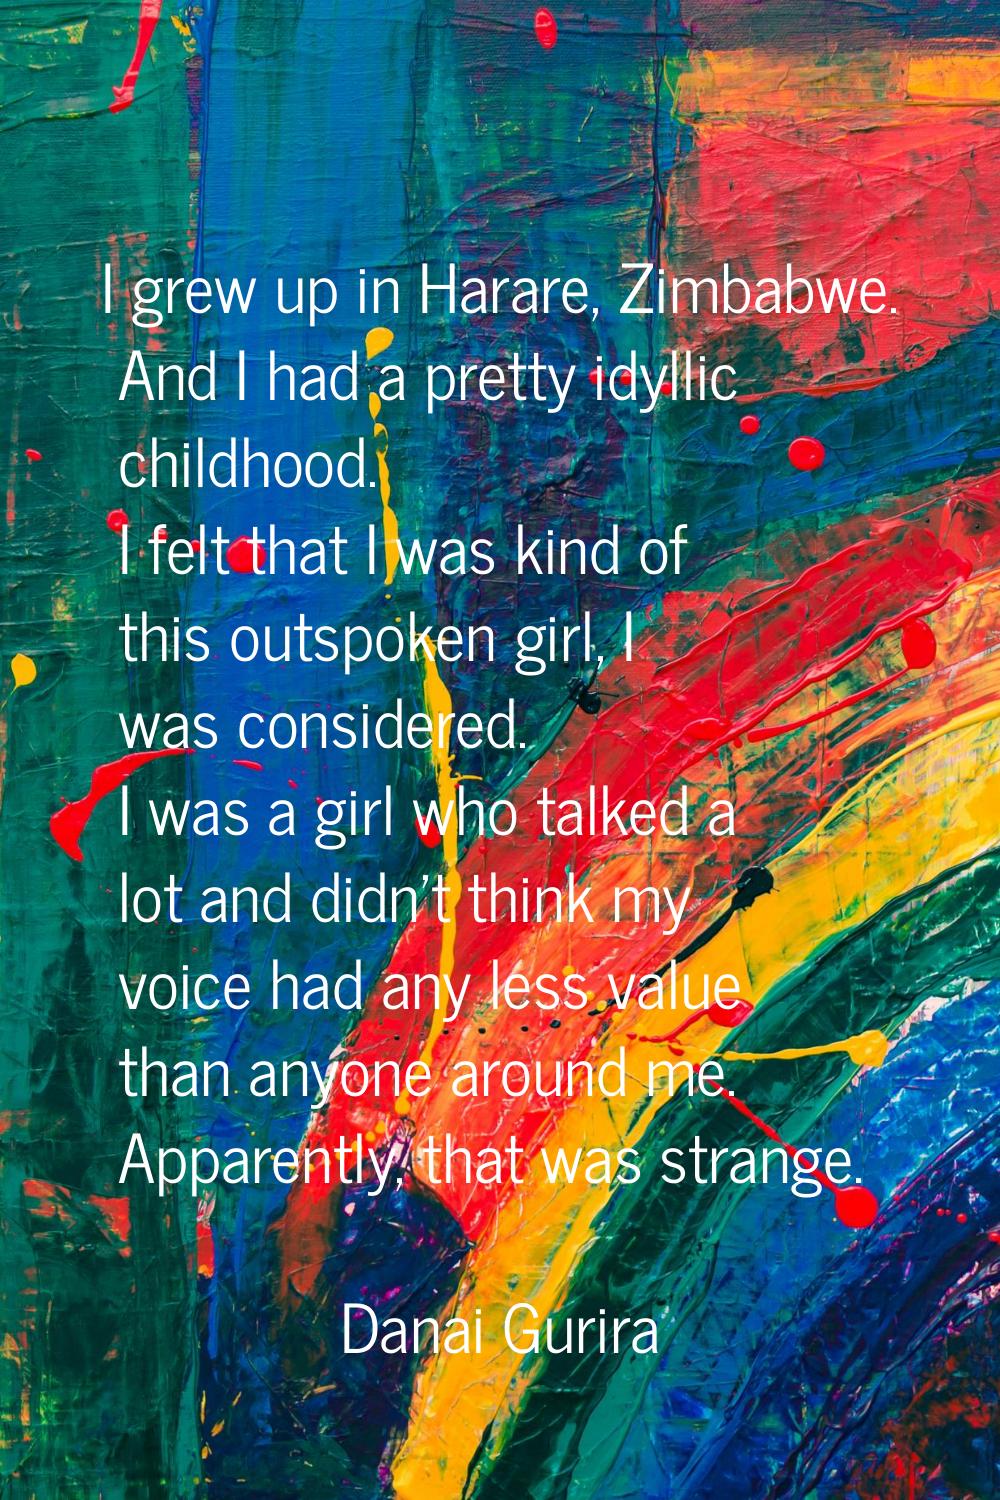 I grew up in Harare, Zimbabwe. And I had a pretty idyllic childhood. I felt that I was kind of this